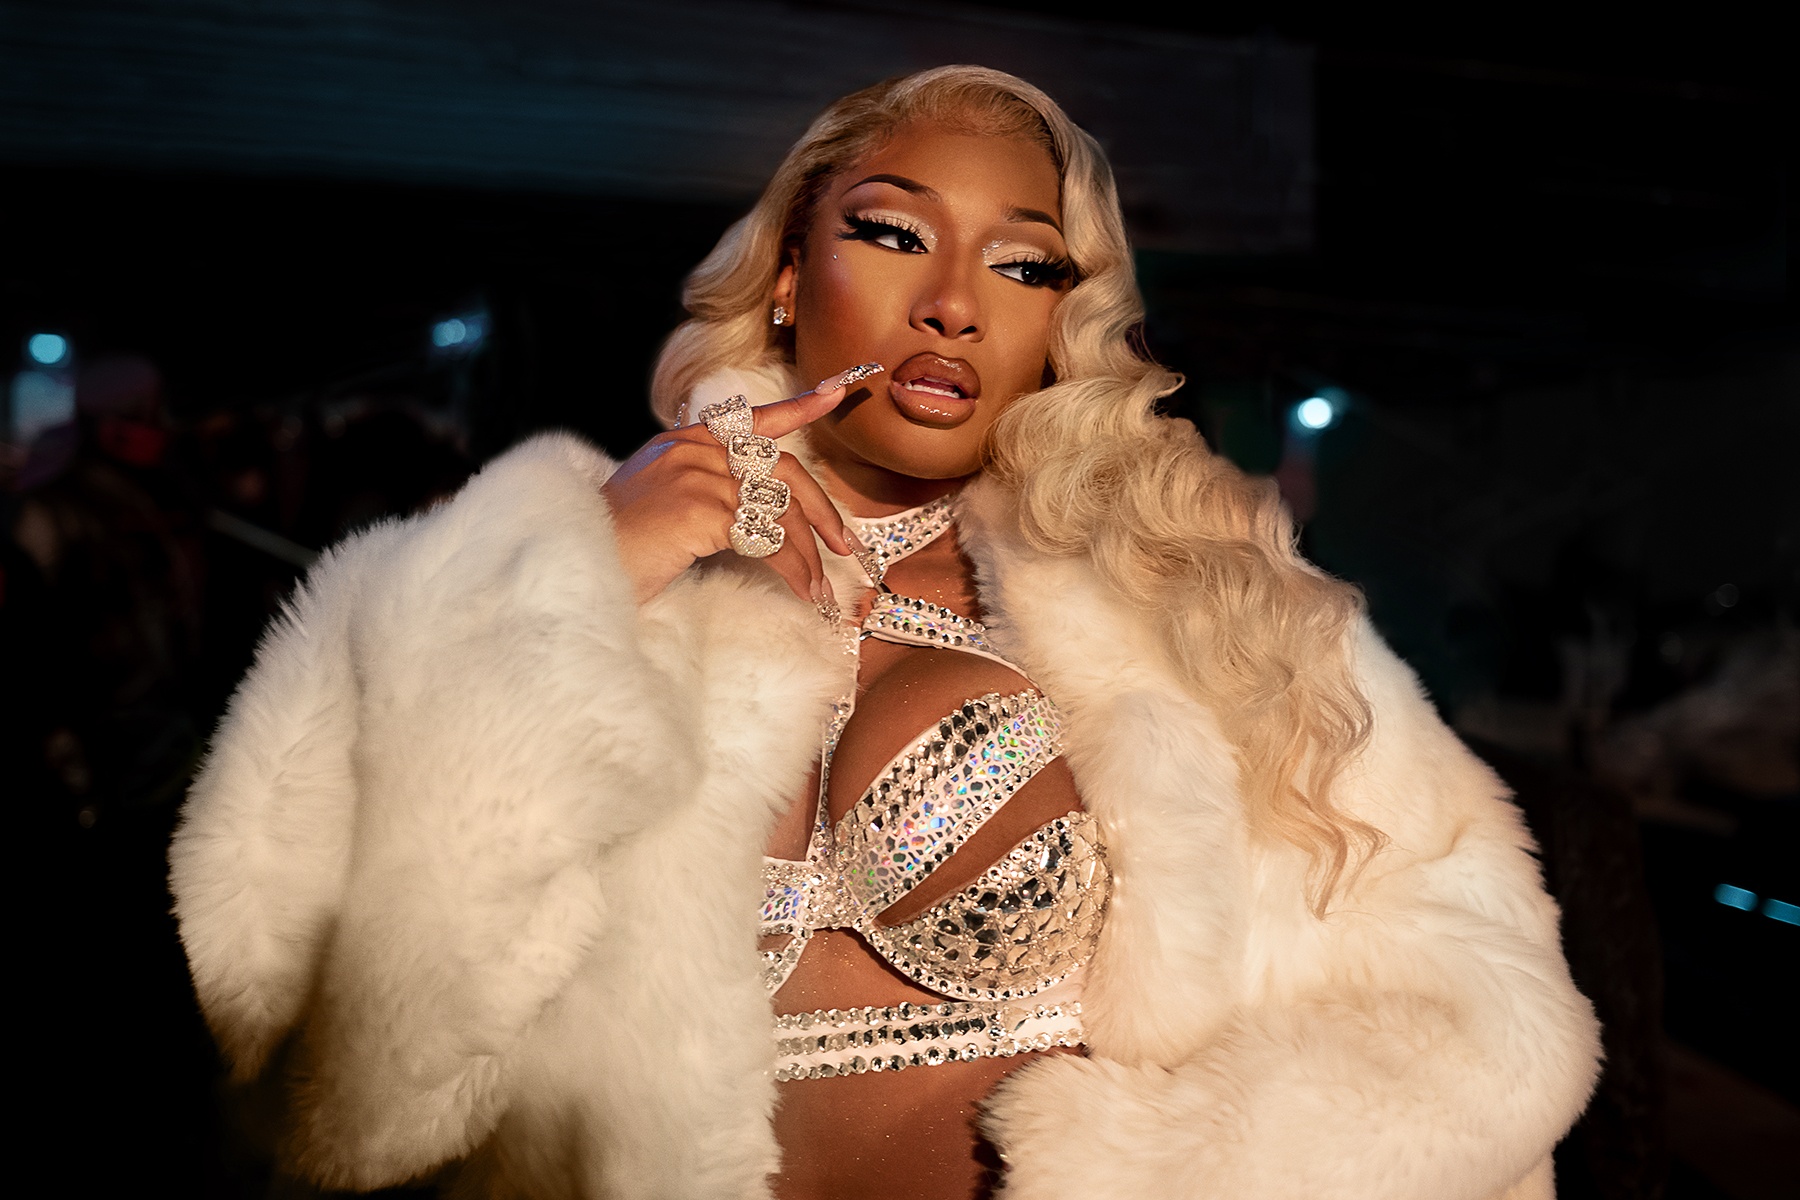 FIRST LOOK: Megan Thee Stallion To Guest Star on STARZ’s “P-Valley” S2